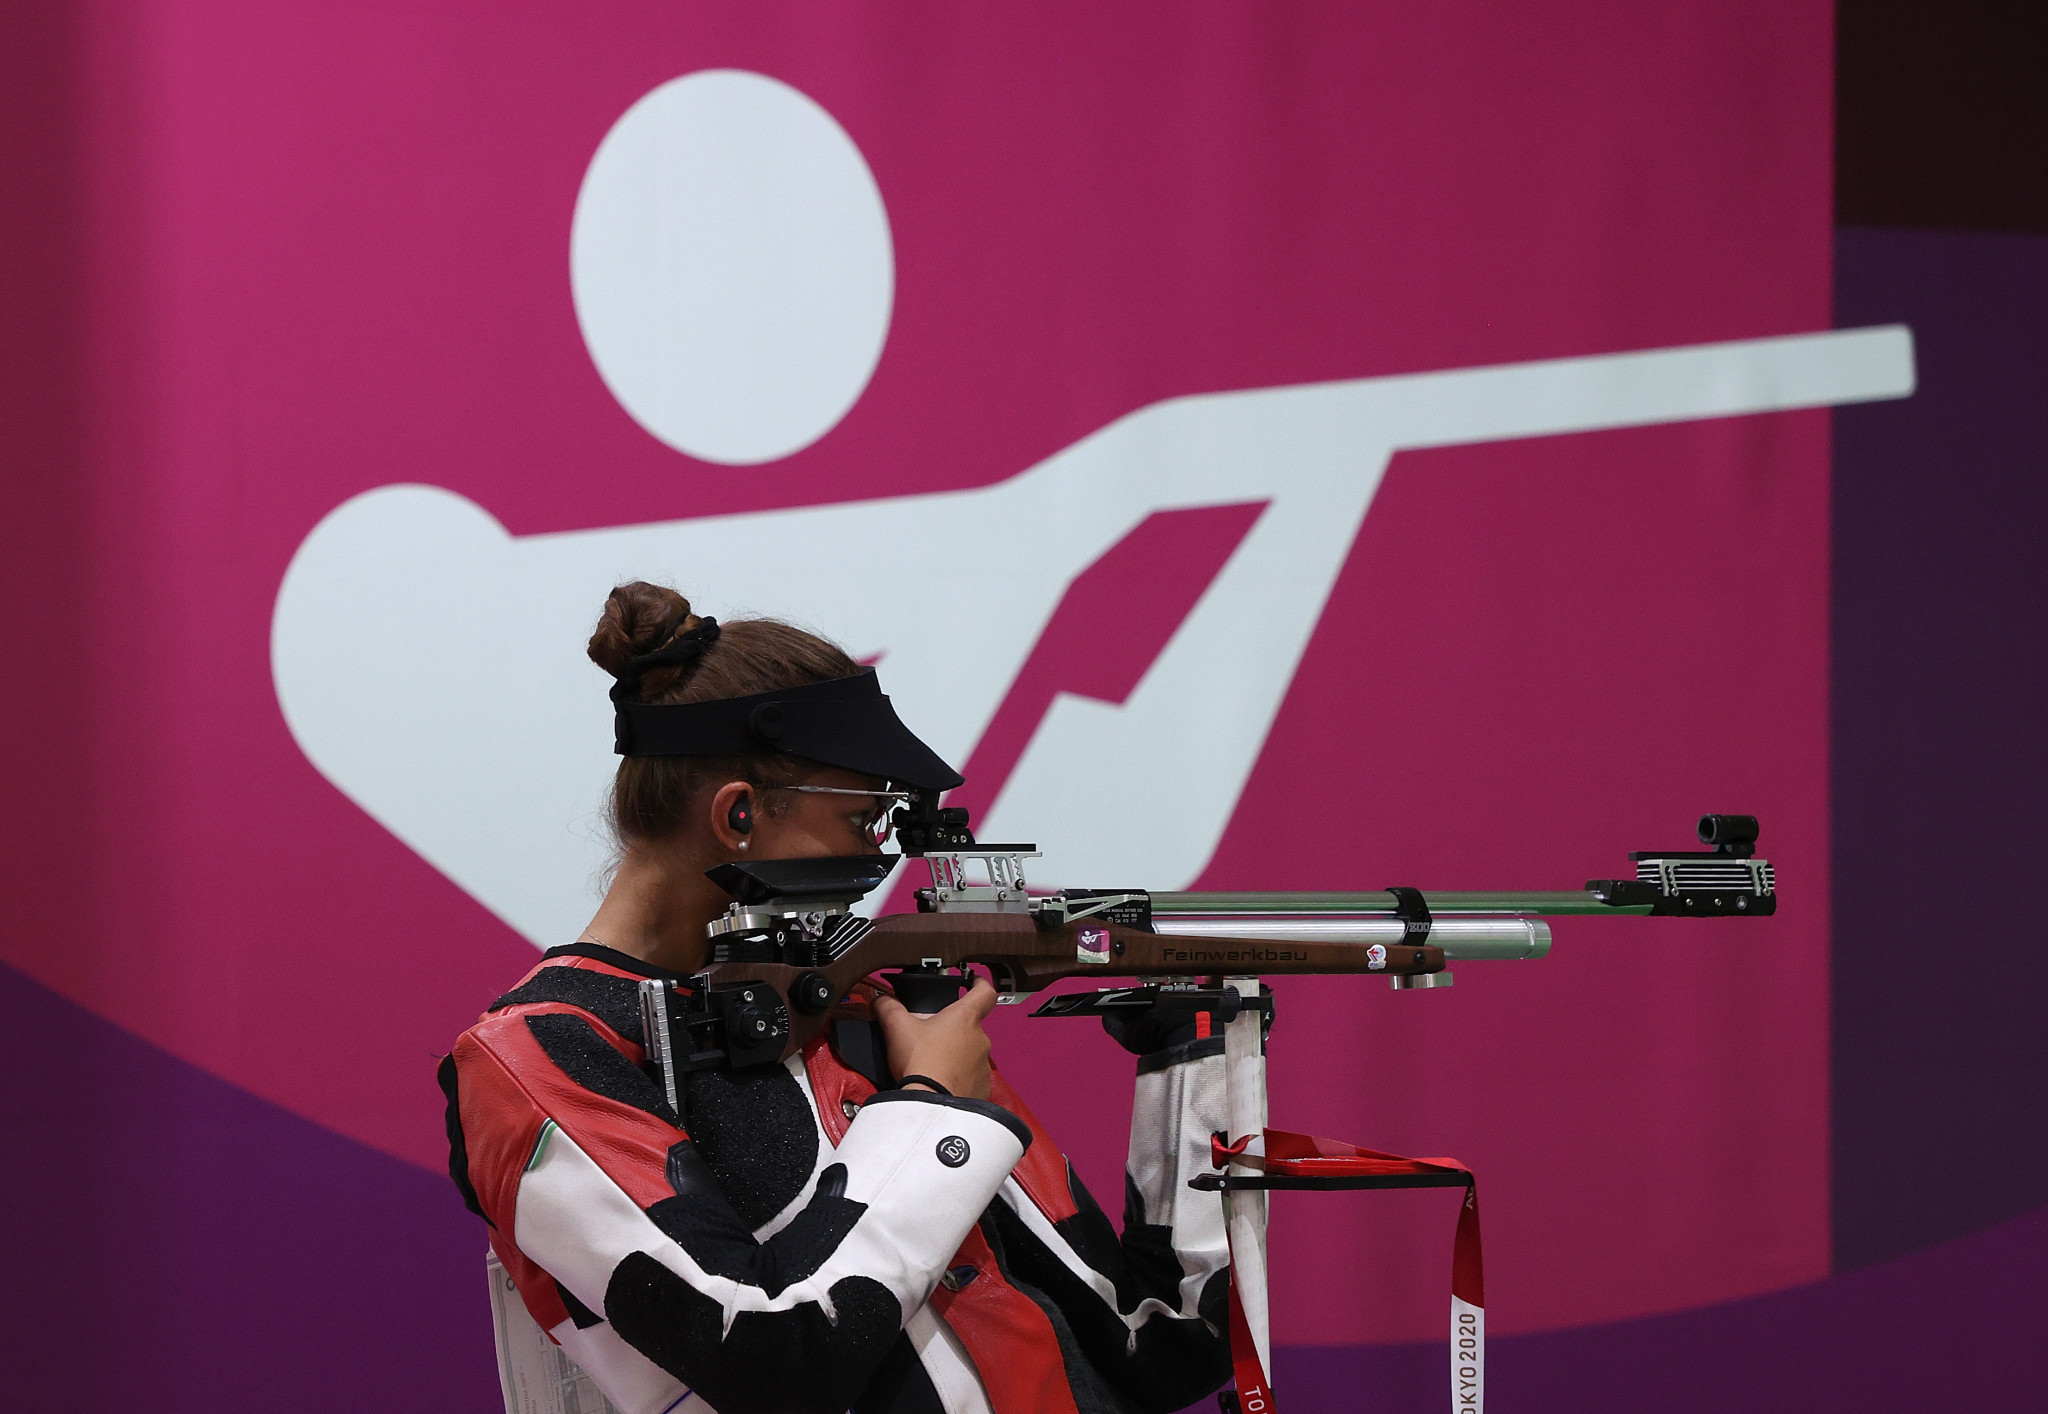 Norway claim two golds at ISSF Shooting World Cup in Rio